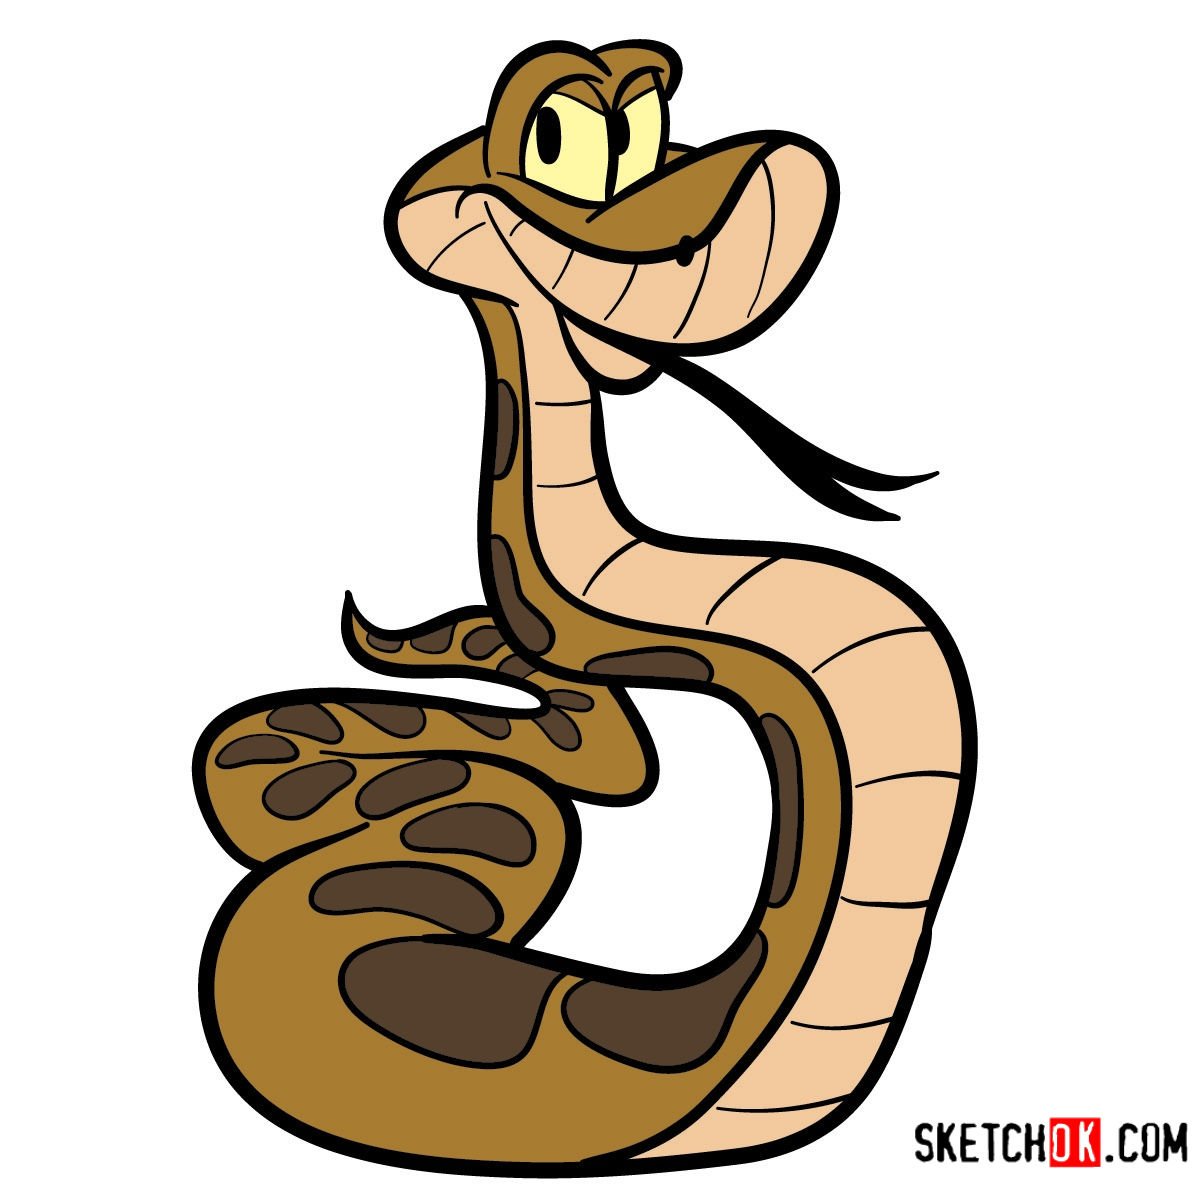 How to draw Kaa | The Jungle Book - Sketchok easy drawing guides